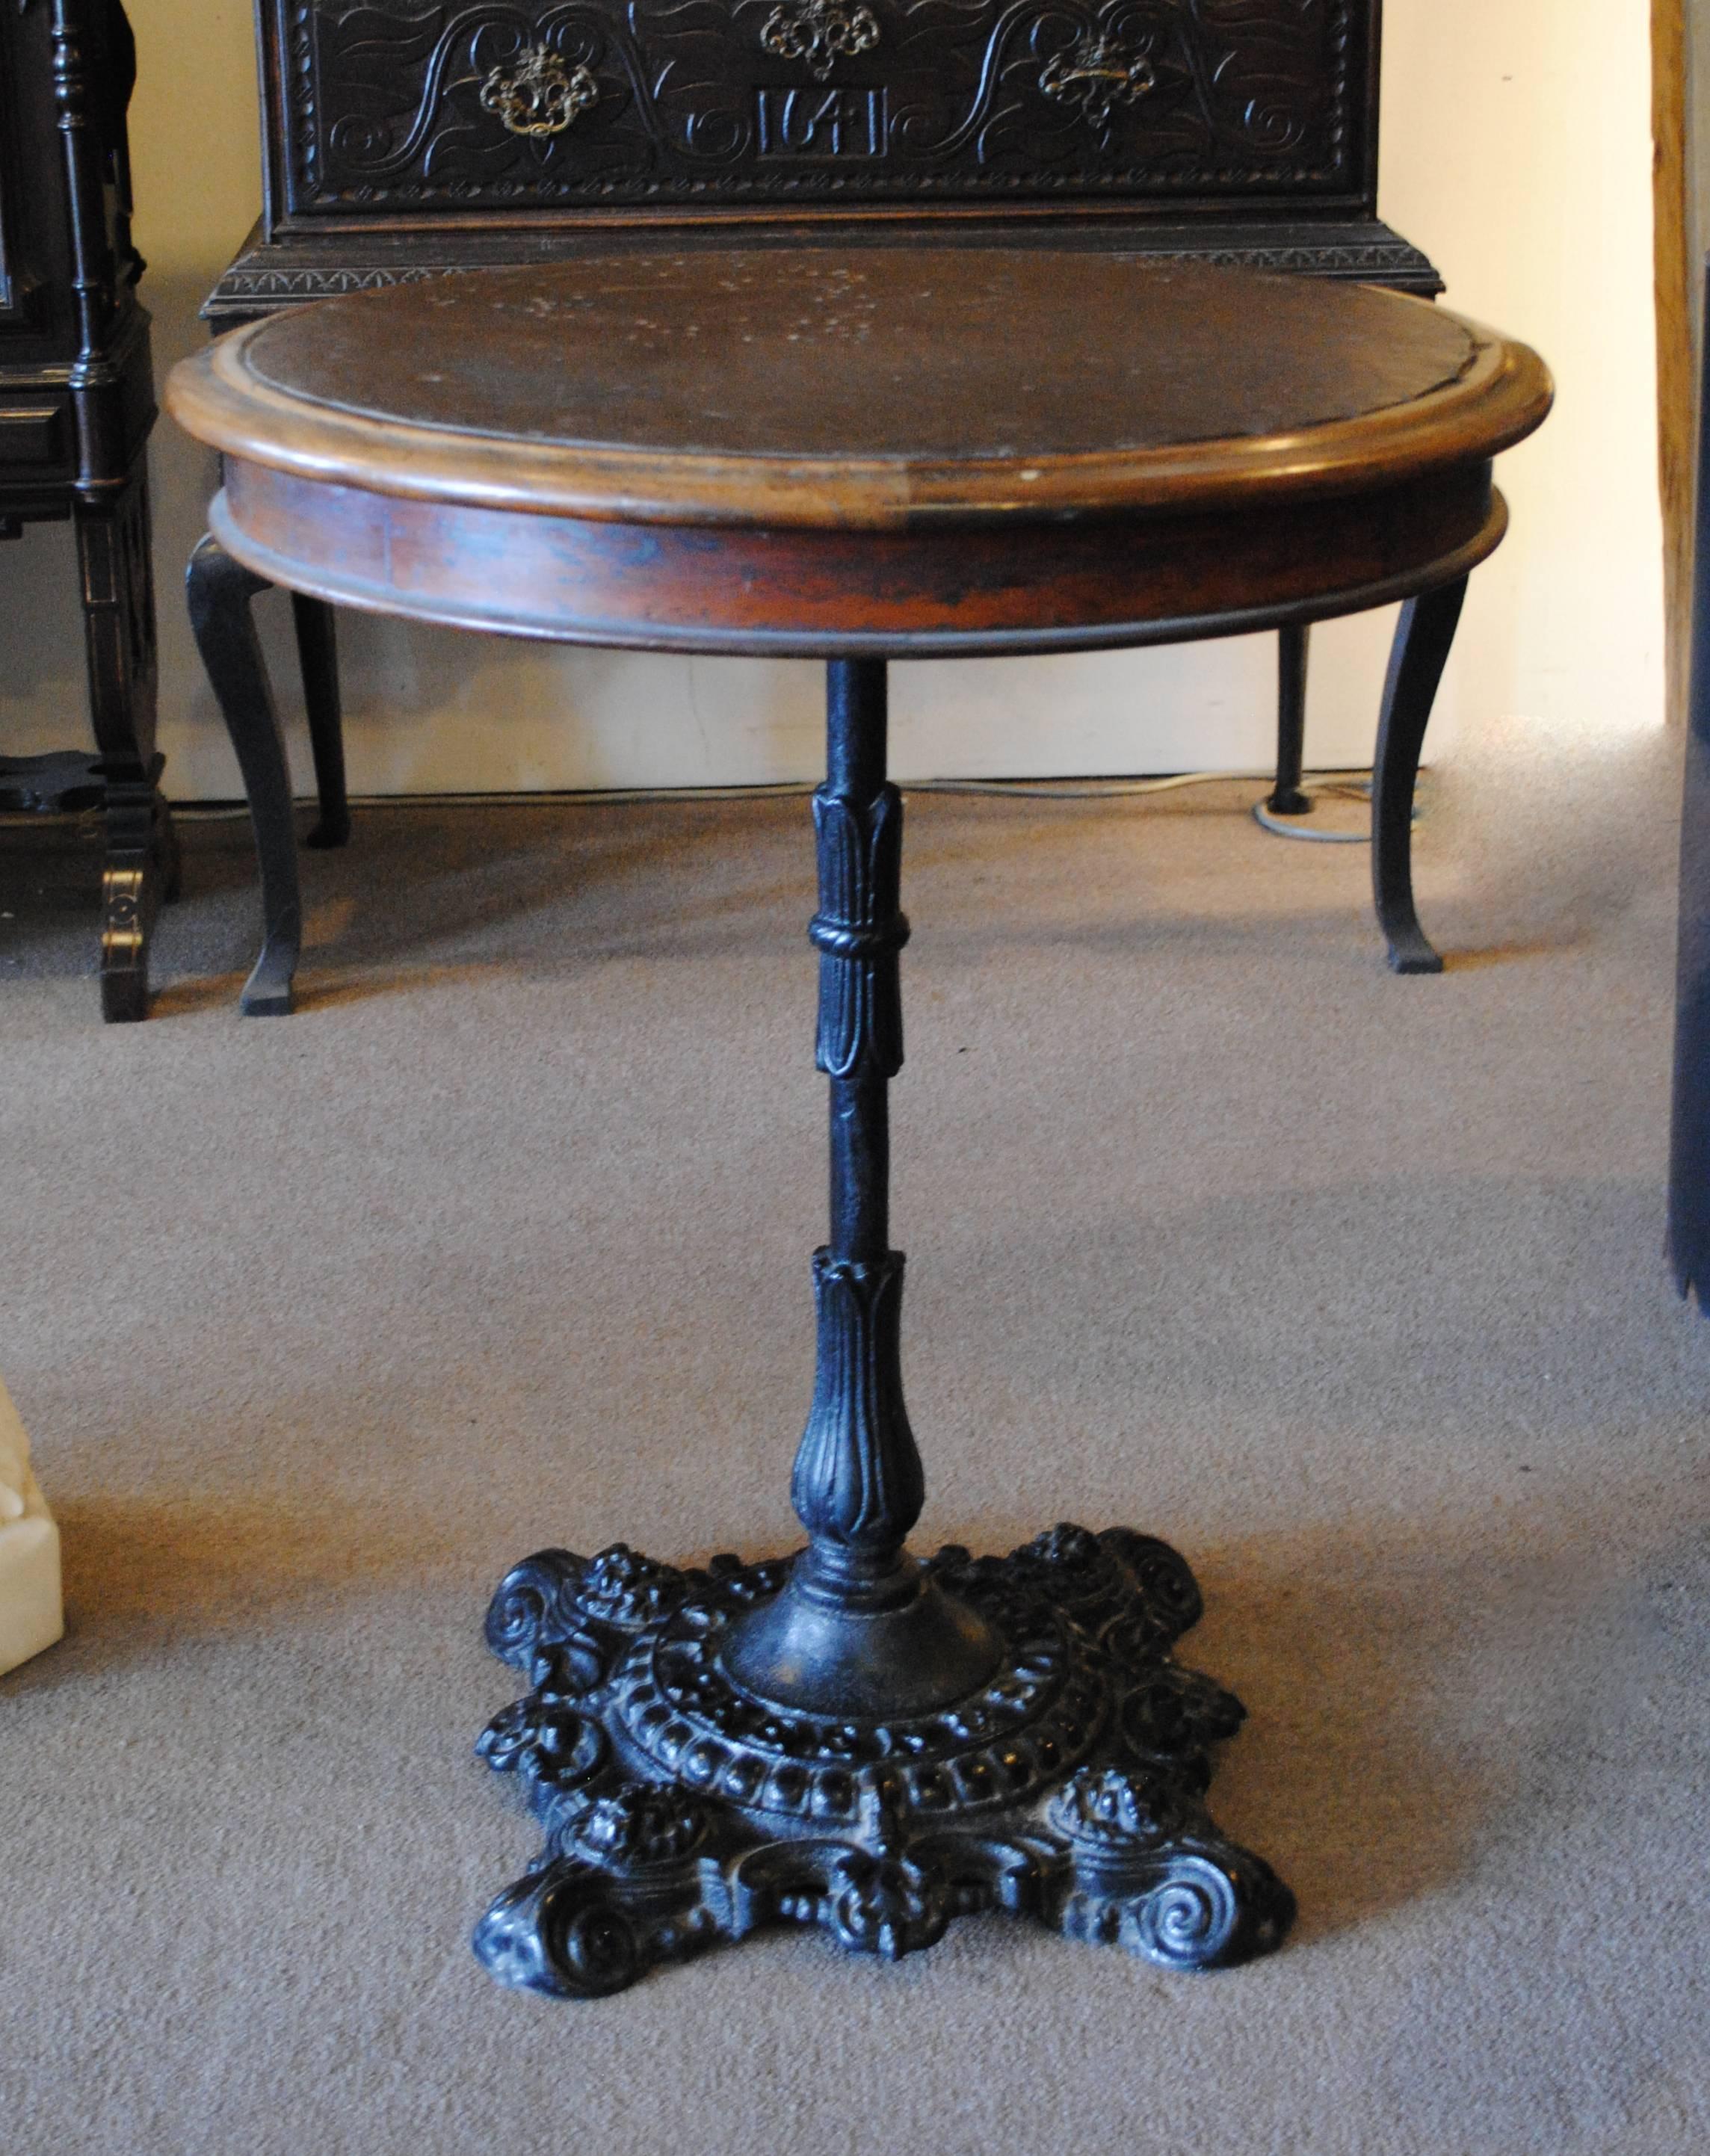 19th century English pub table made by T. Green & Sons, Leeds. Features original leather inset table top and cast iron base with lion face accents.